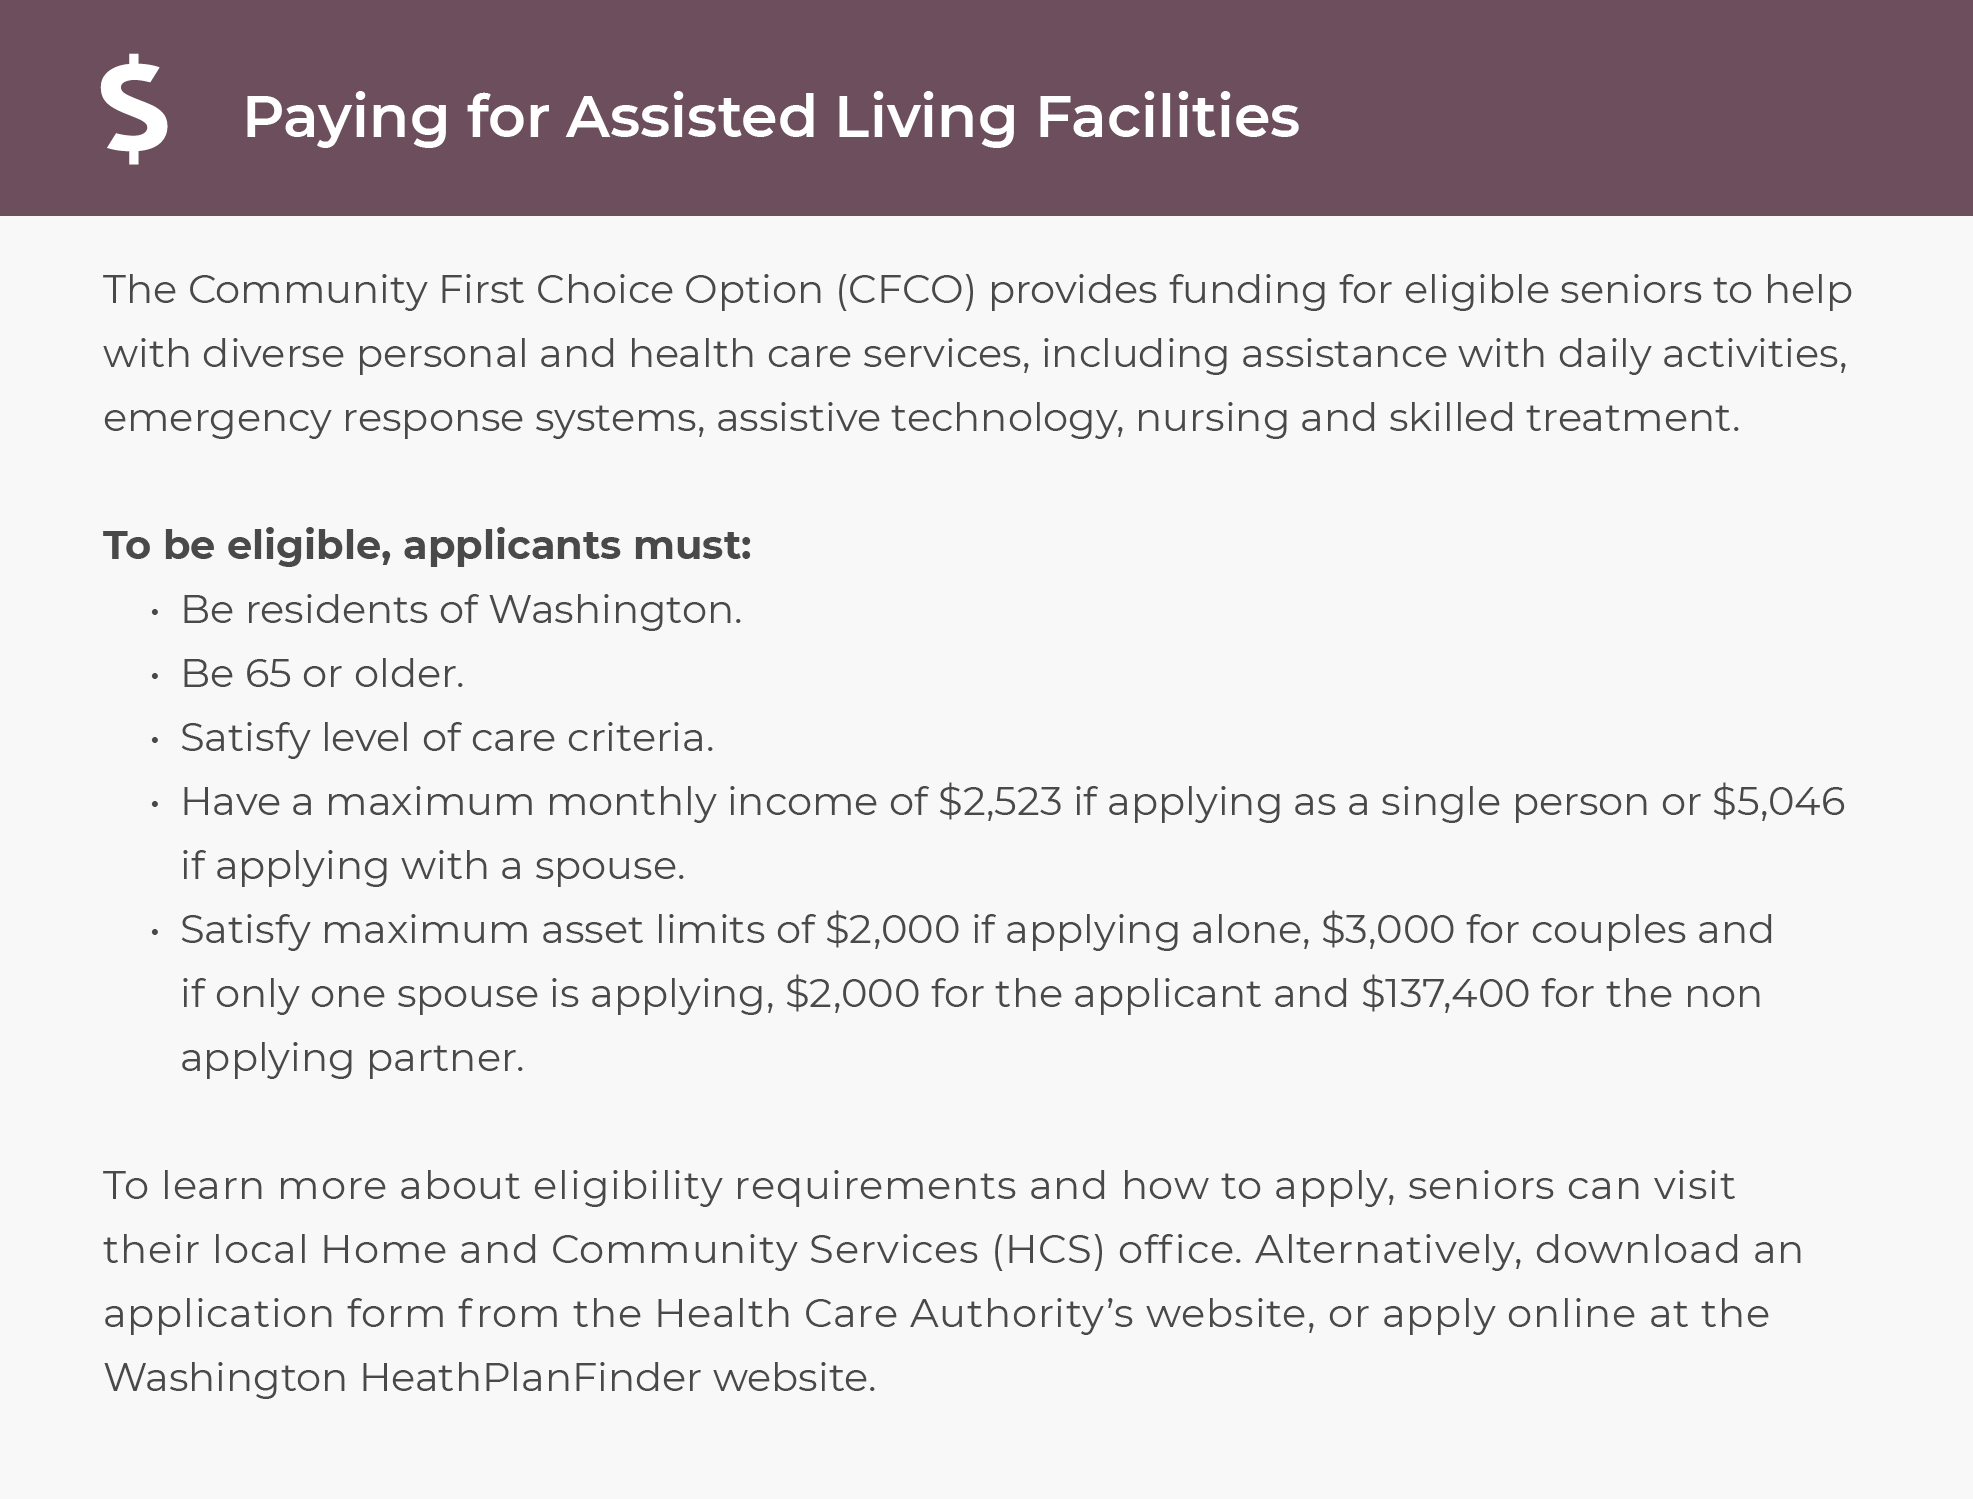 Paying for assisted living in Washington